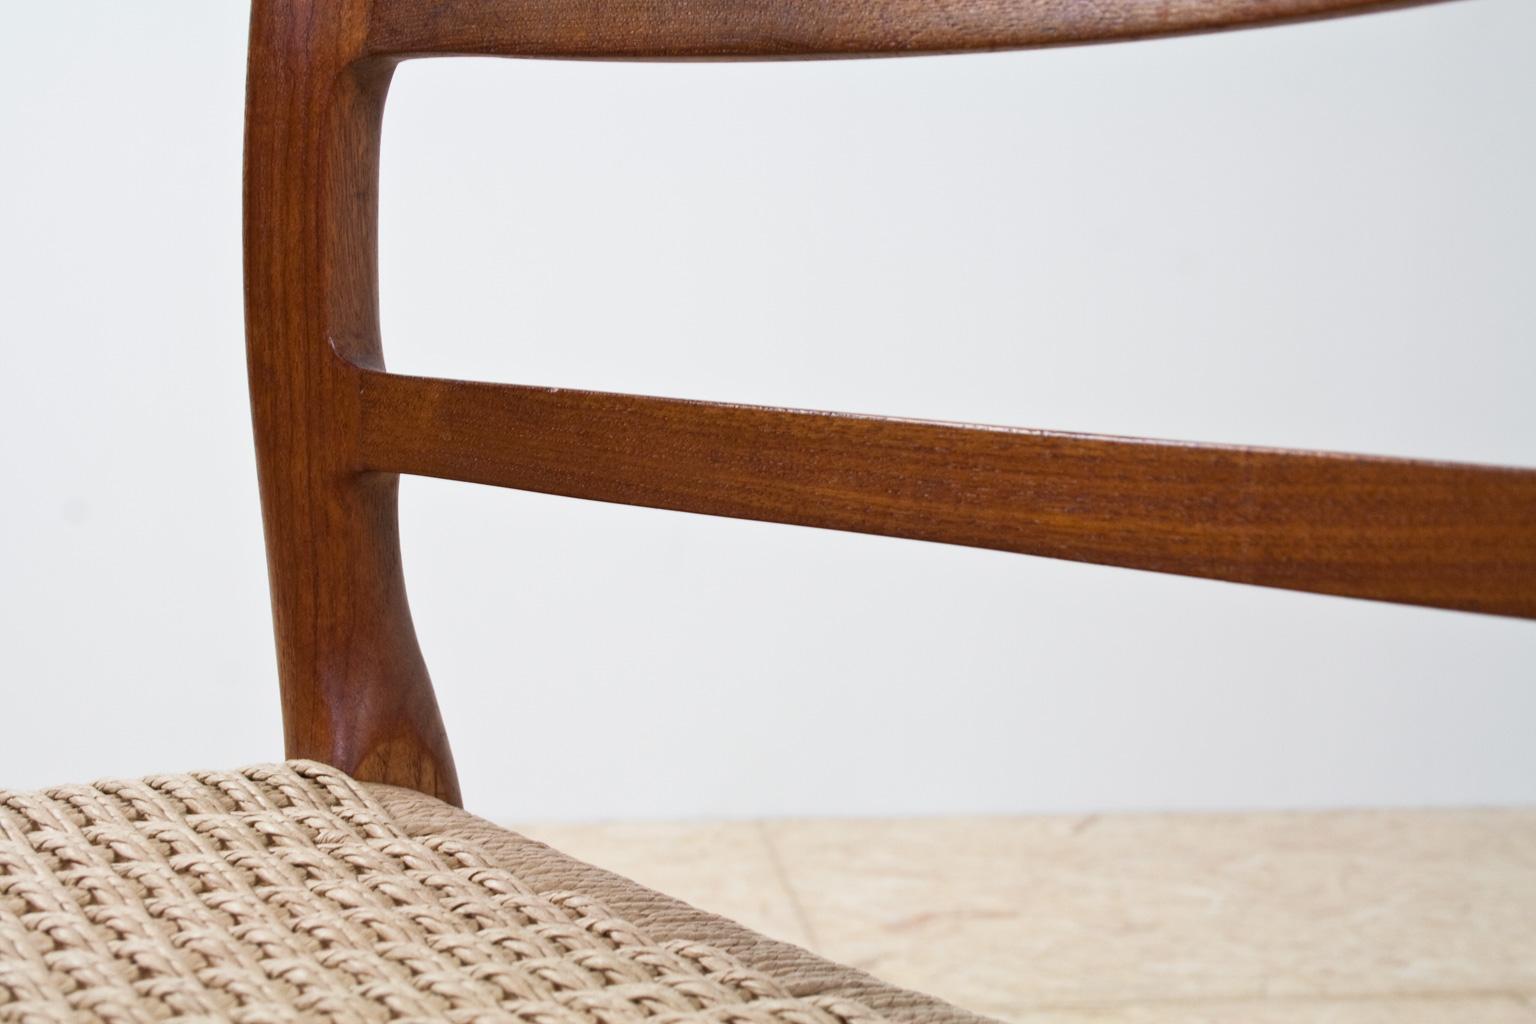 Oiled Scandinavian Modern Dining Chair in Teak and Paper Cord by Niels Moller, 1954 For Sale